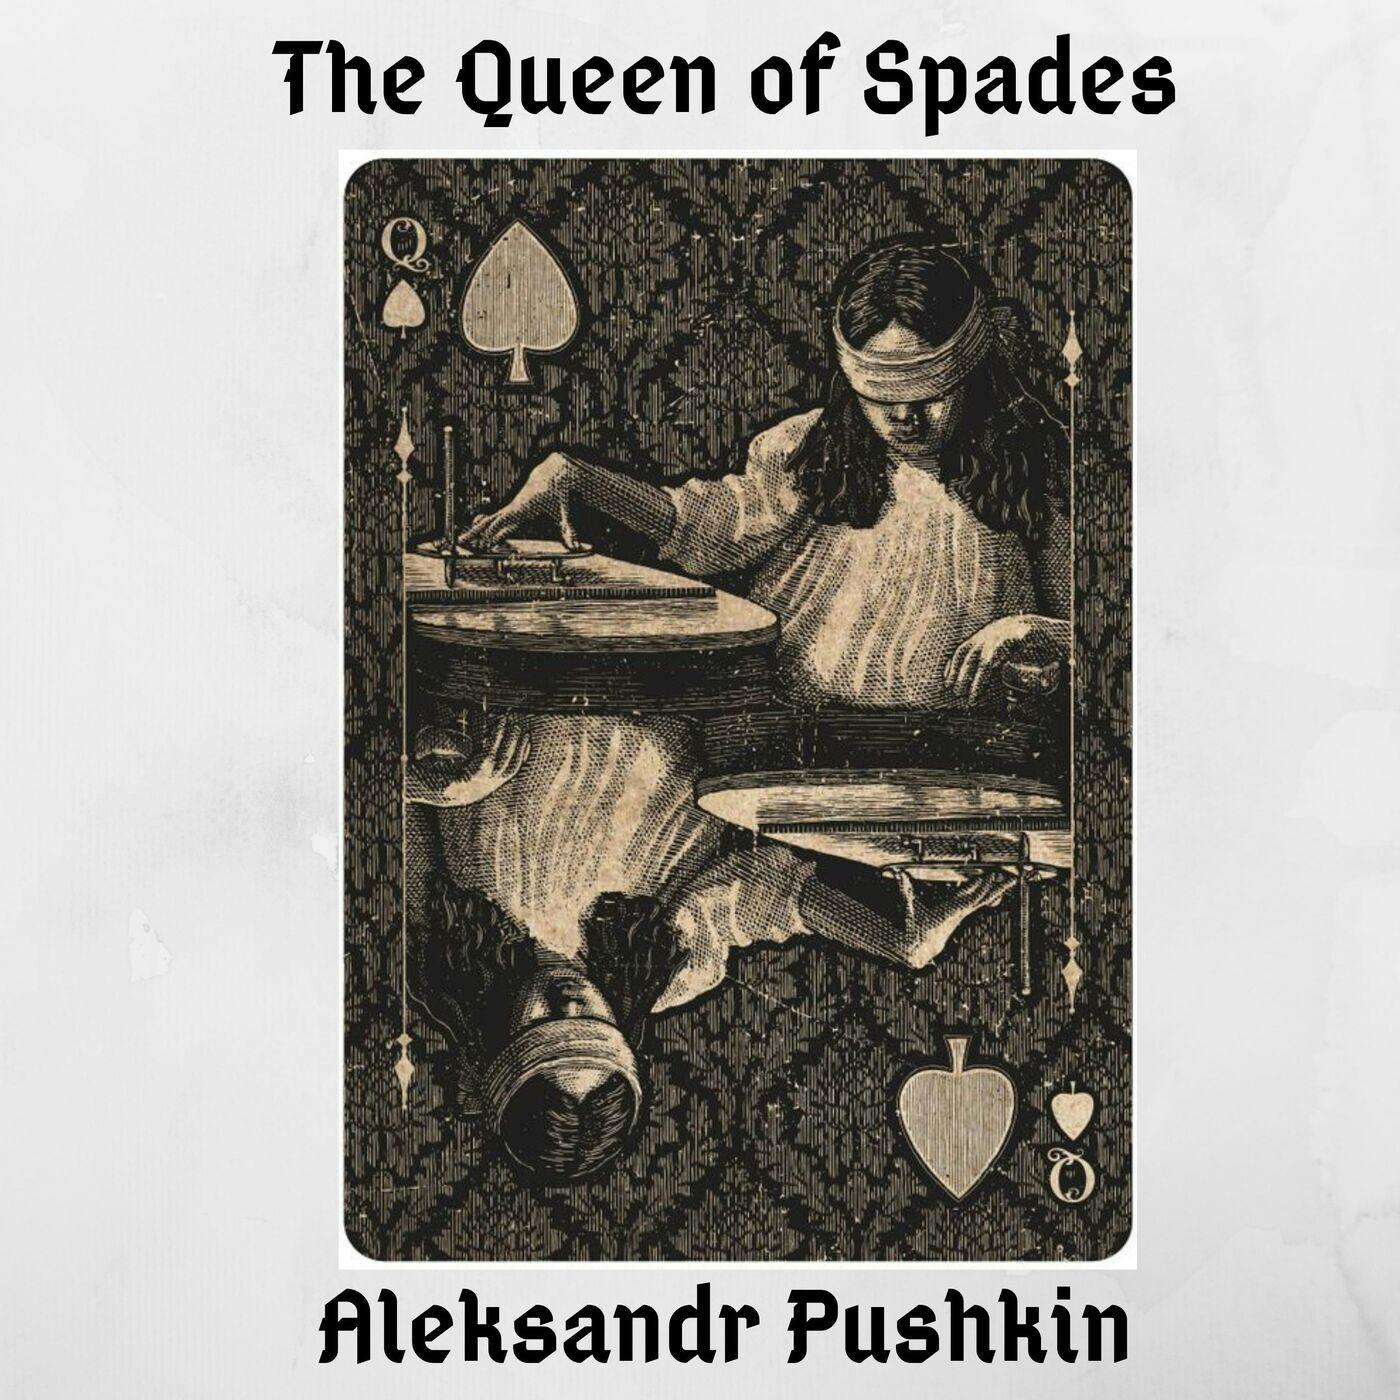 Episode 34: The Queen of Spades by Aleksandr Pushkin